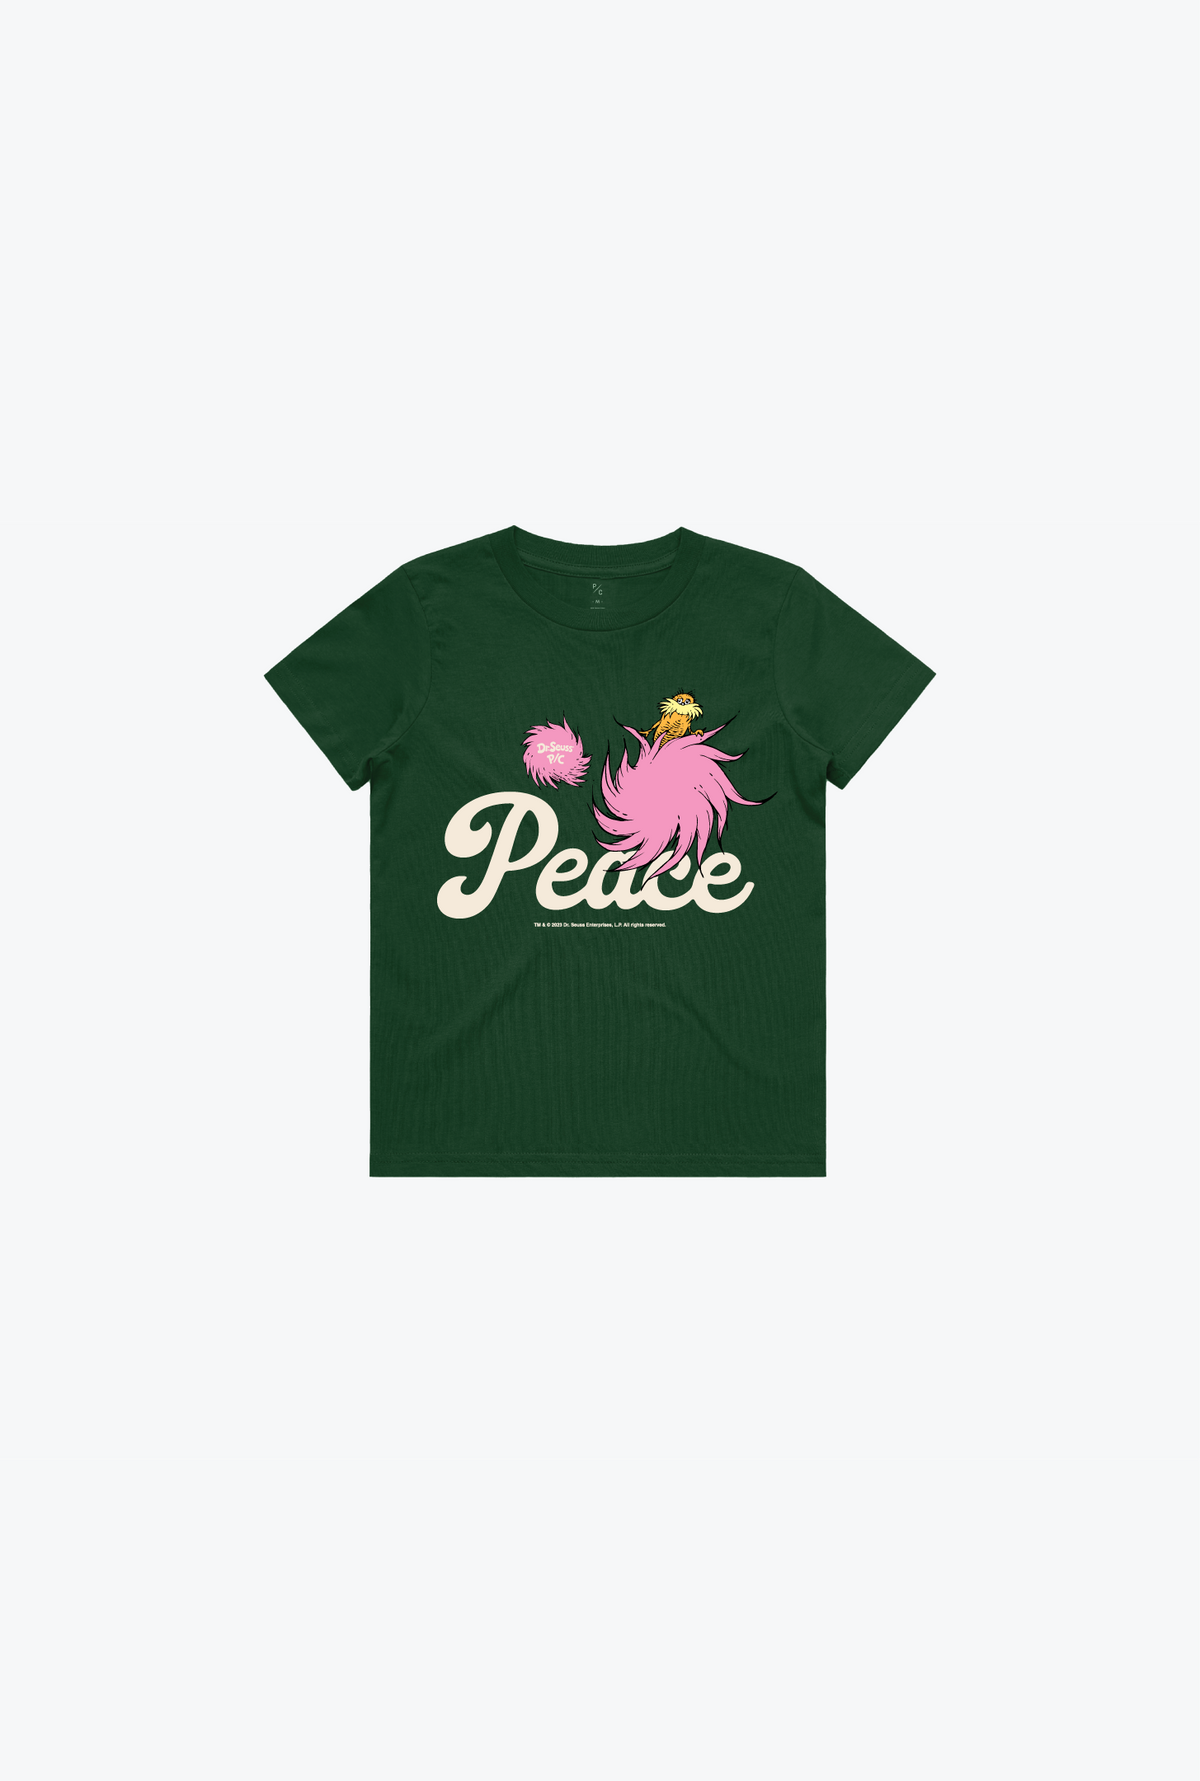 The Lorax Vintage Character Youth T-Shirt - Forest Green